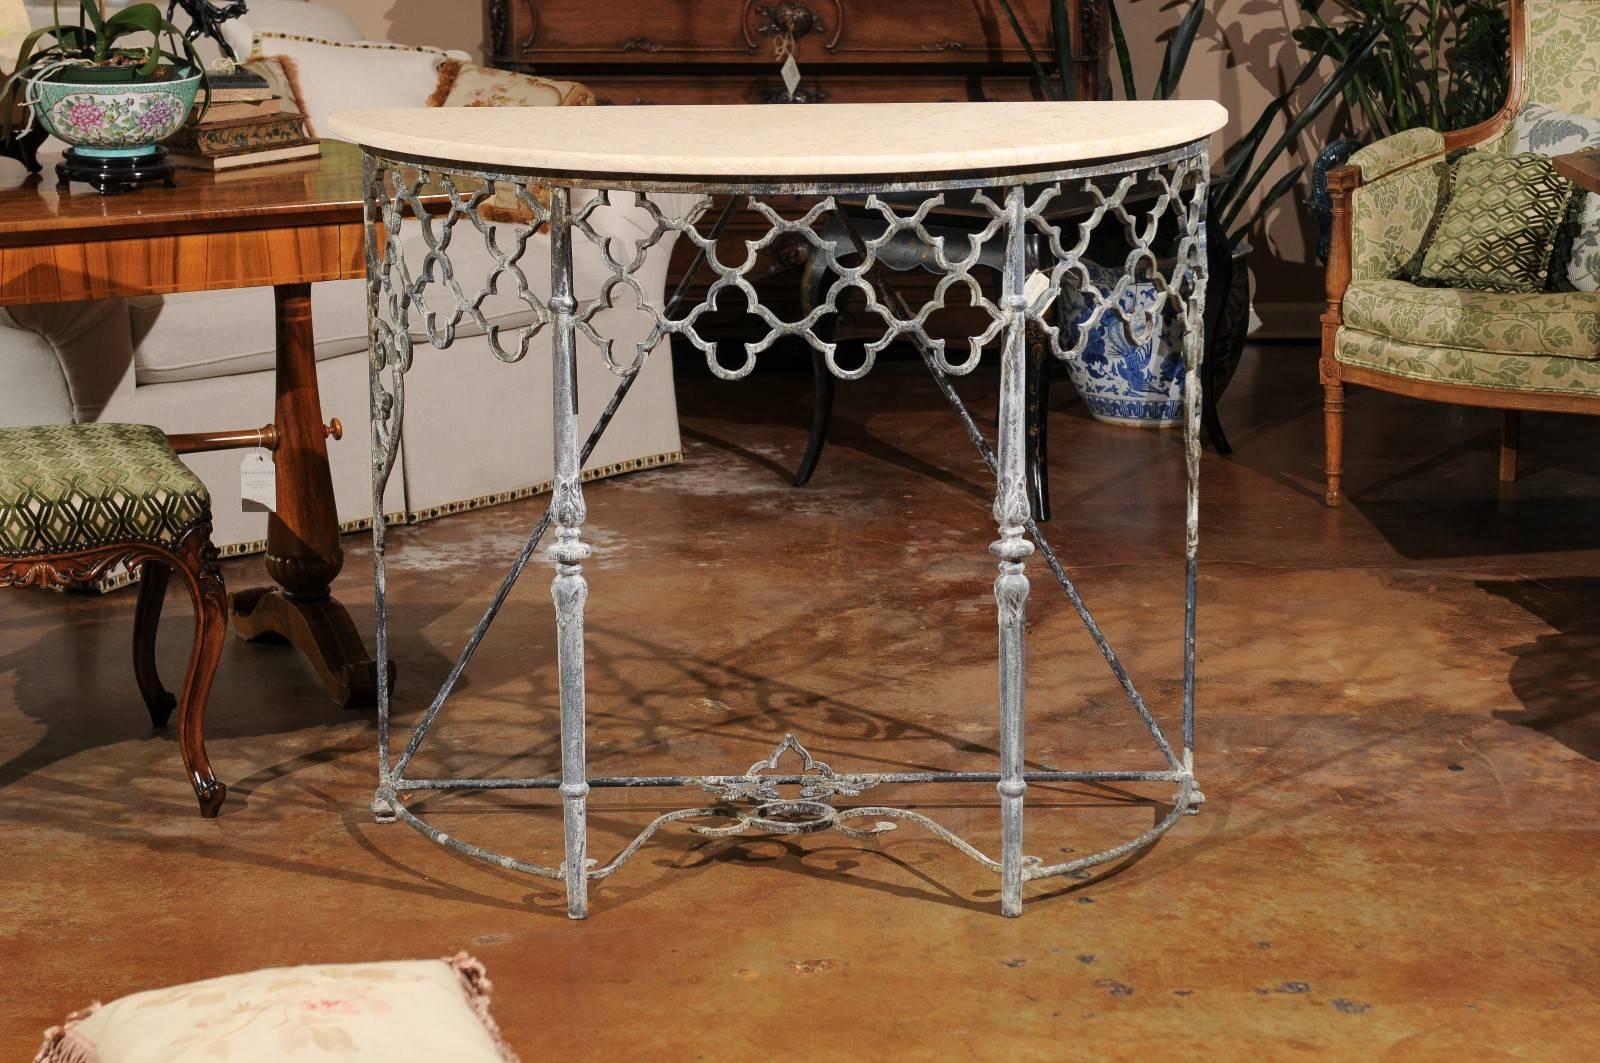 These base of these demilune tables is made from old iron which has been hand-forged. The top is new limestone.